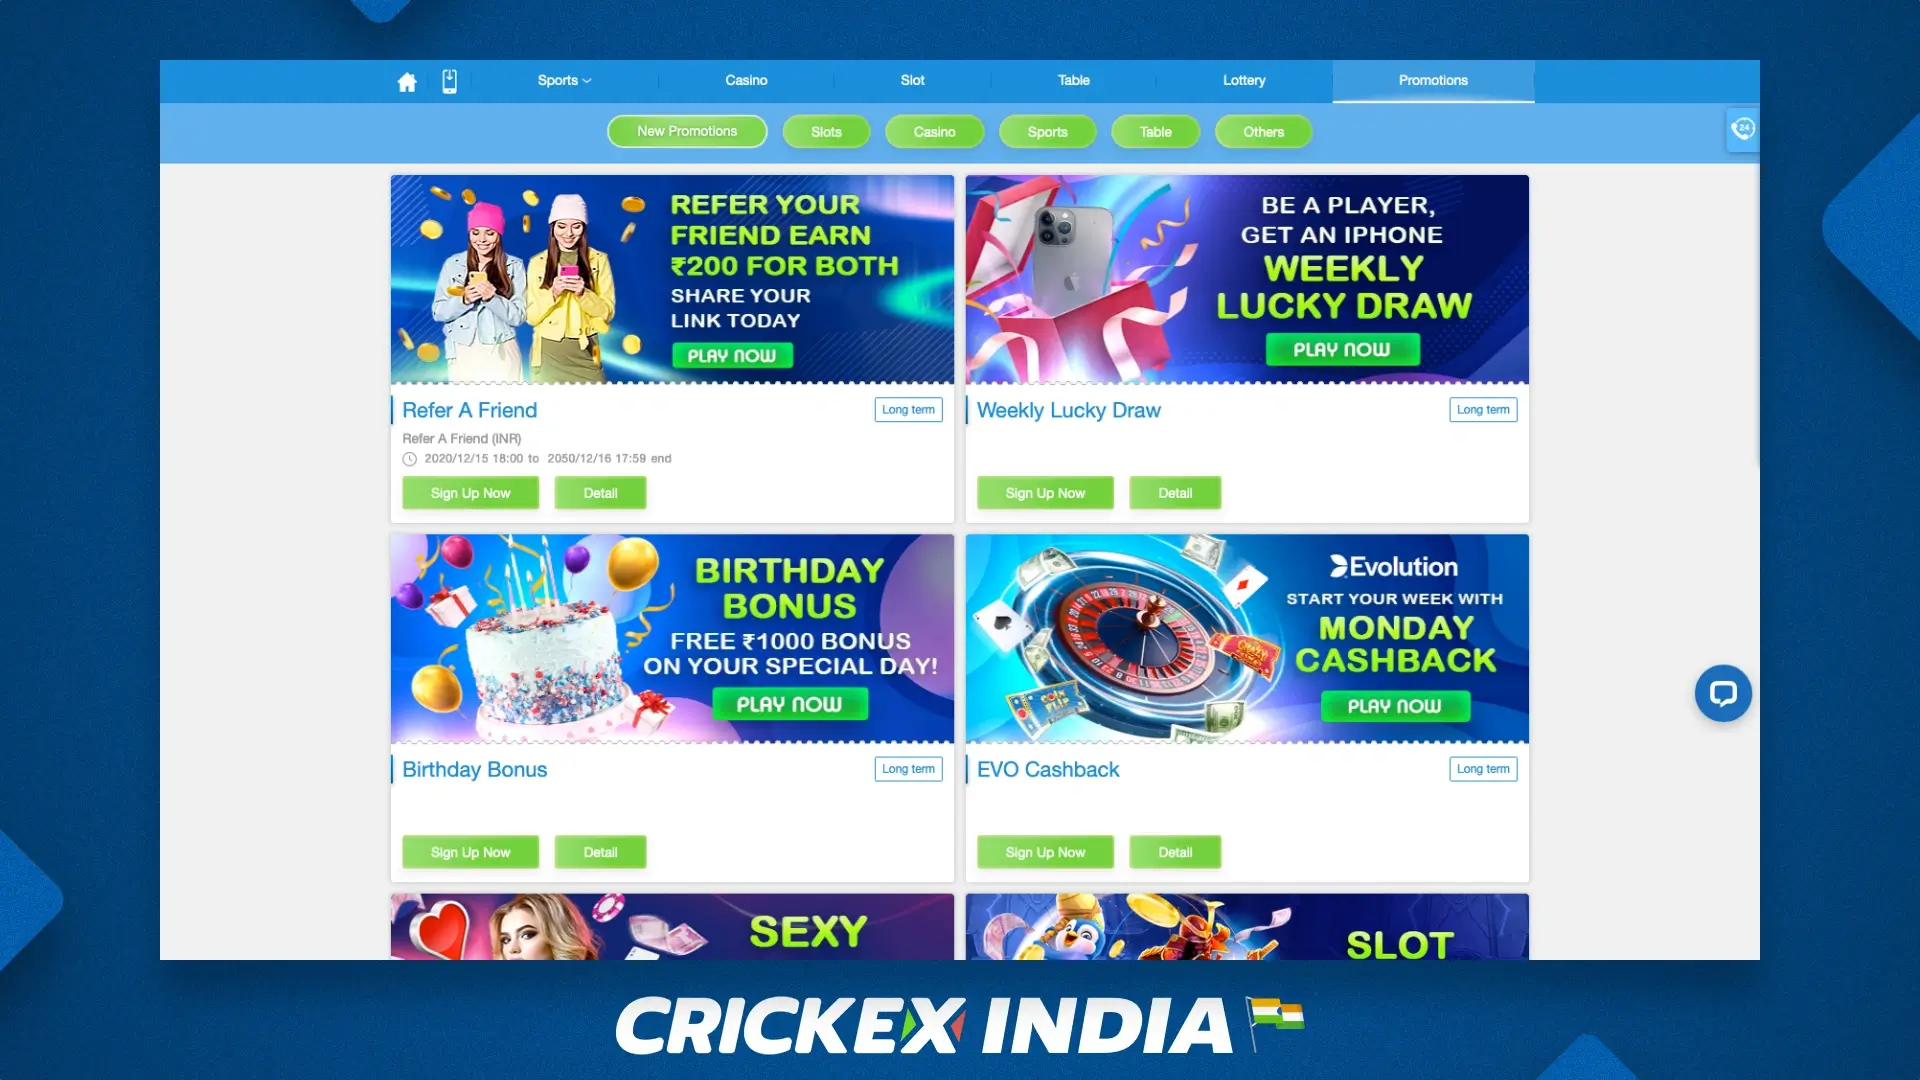 Promotions that are available to both new and current Crickex customers